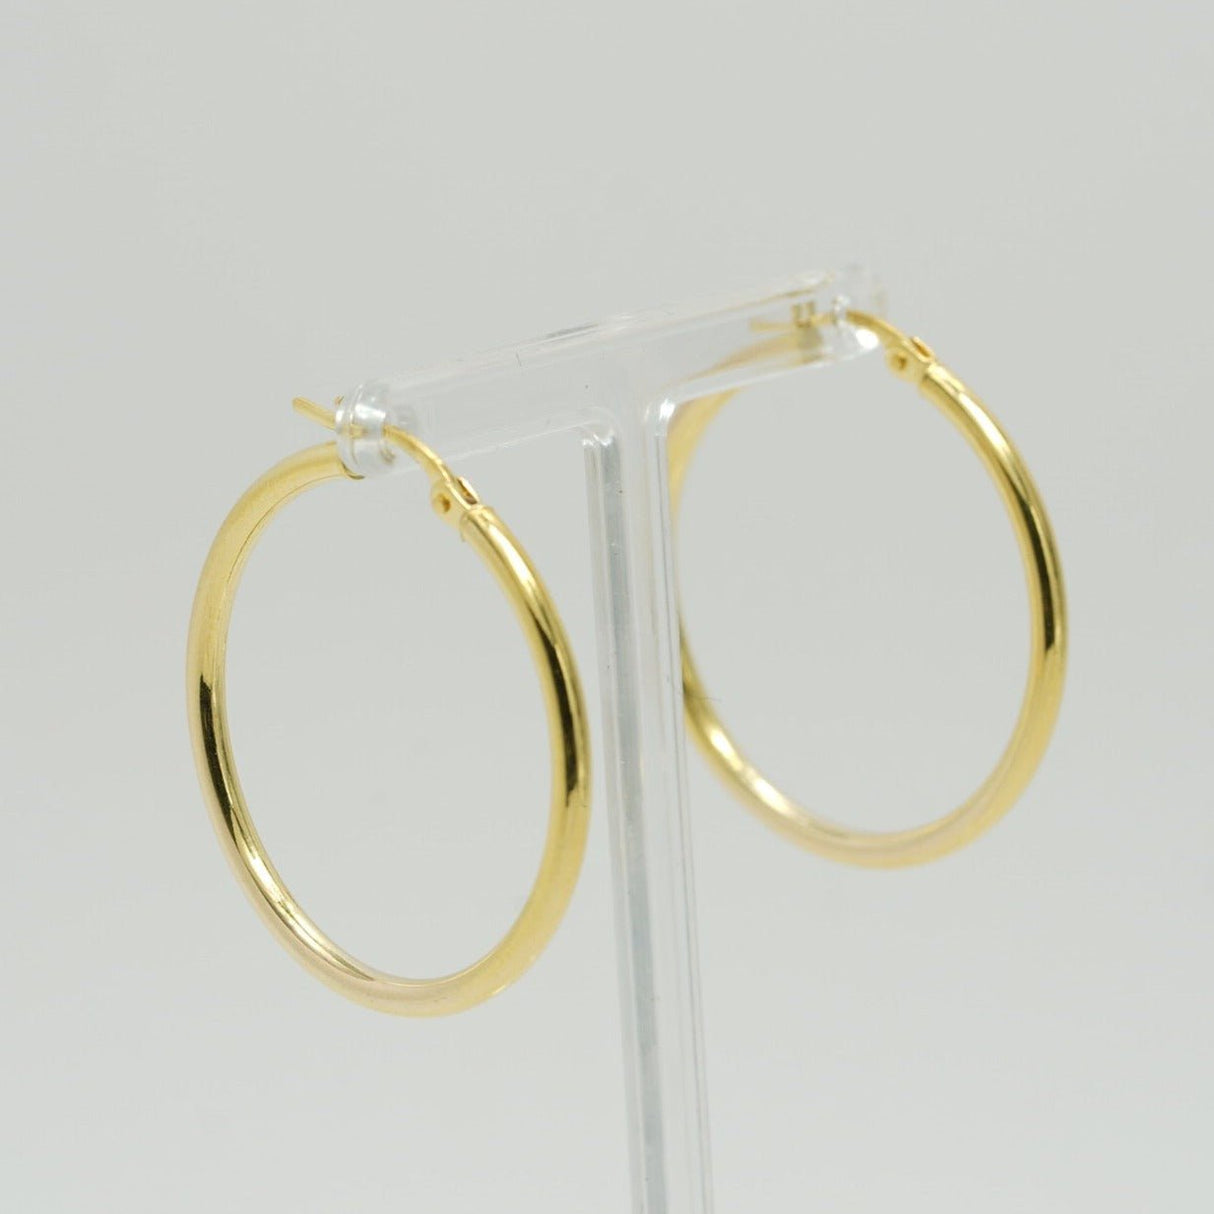 14K Gold Hoop Earrings, light gold hoop earrings, Diamond Origin,Choose our gold hoop earrings and experience the perfect blend of quality, style, and versatility. Whether you're treating yourself or looking for the perfect gift for someone special, these earrings are sure to make a lasting impression. 